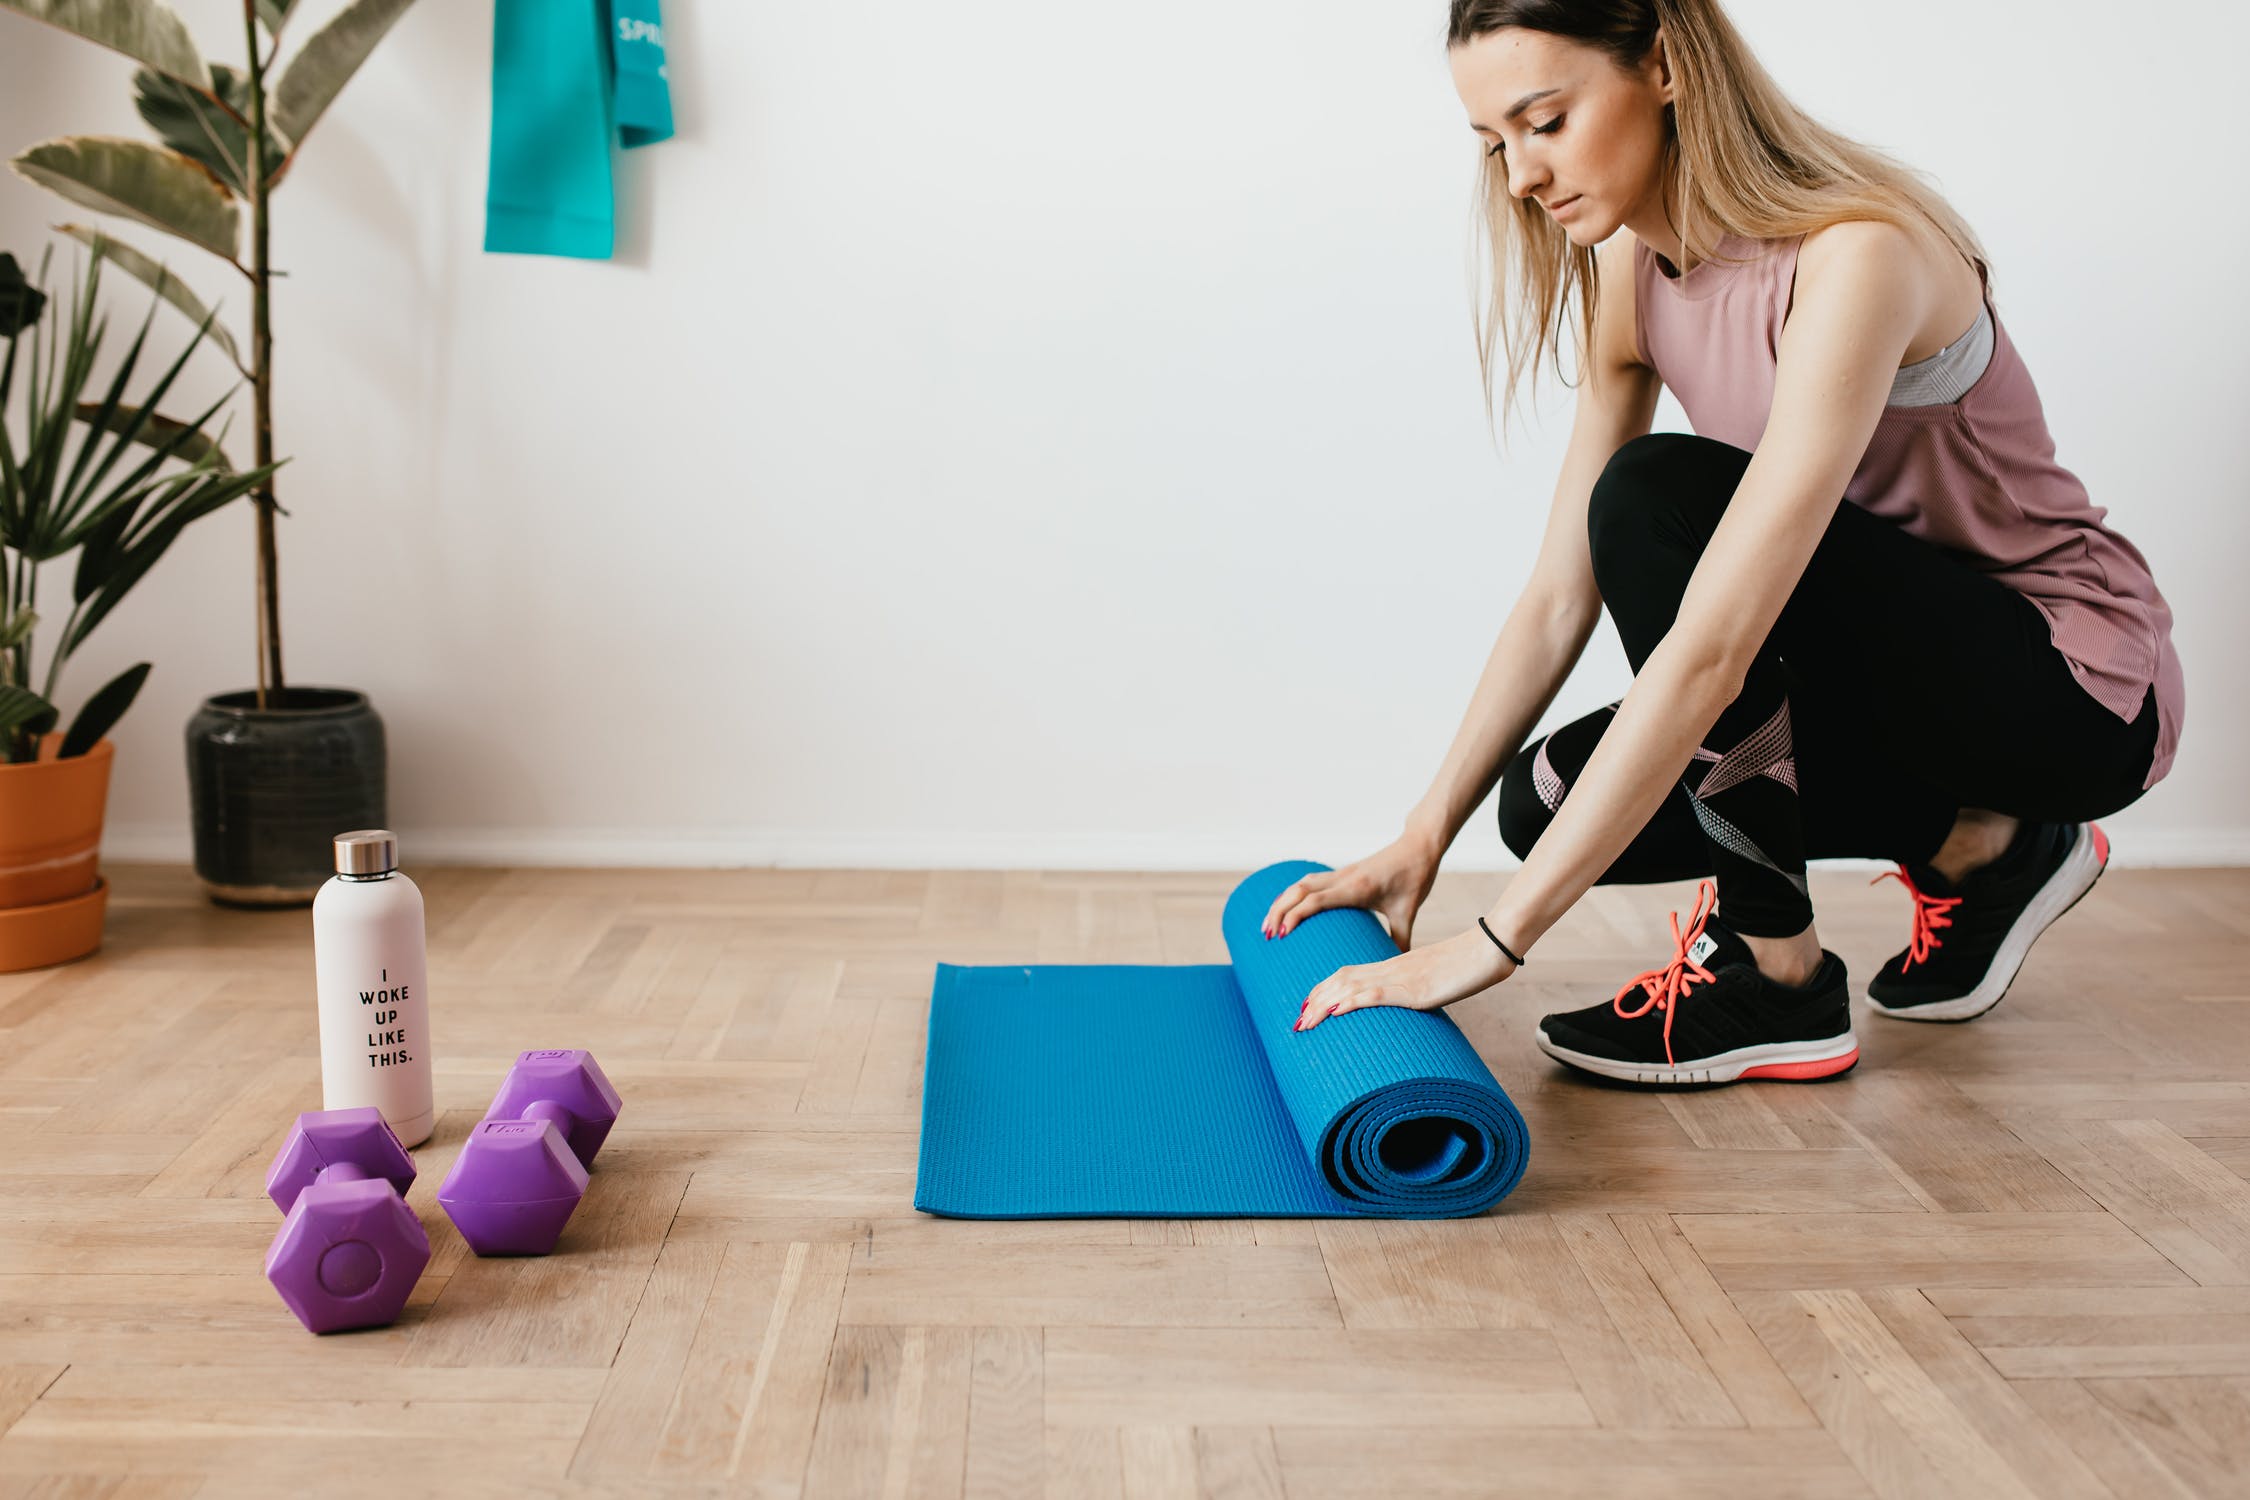 A girl in a squatting posture is preparing the fitness mat on the floor to do exercises fast.